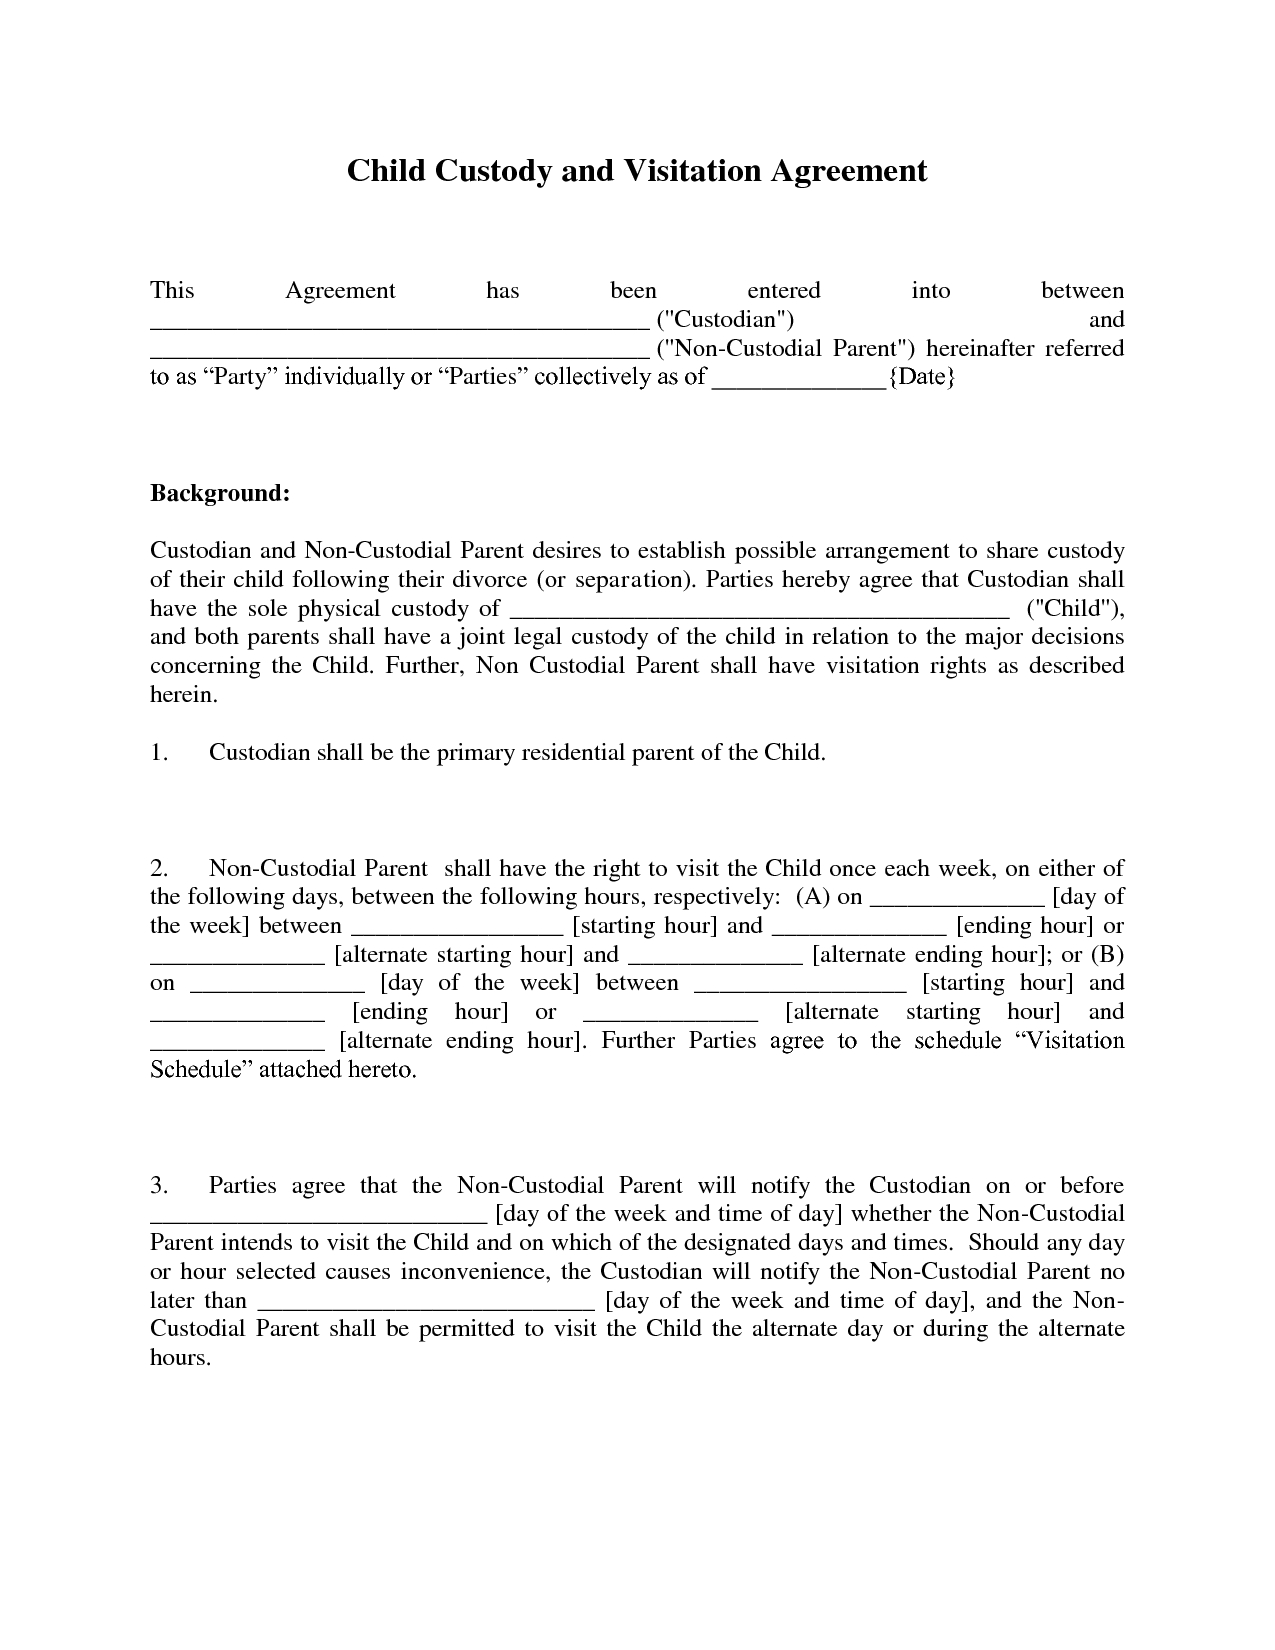 Child Visitation Letter Template - How to Write A Custody Agreement Letter Gallery Letter format